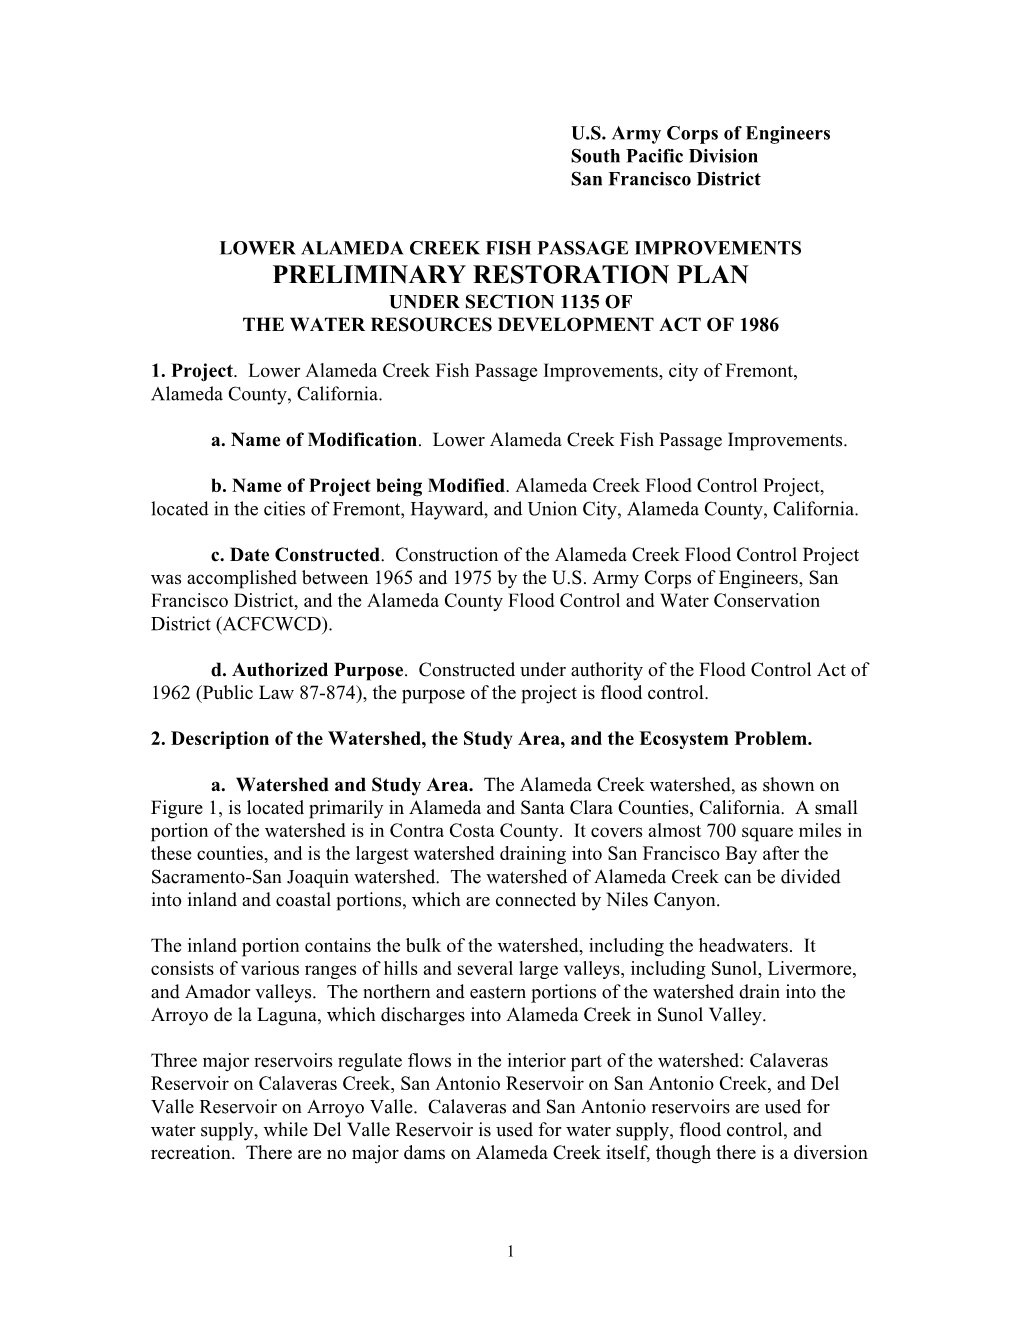 Preliminary Restoration Plan Under Section 1135 of the Water Resources Development Act of 1986